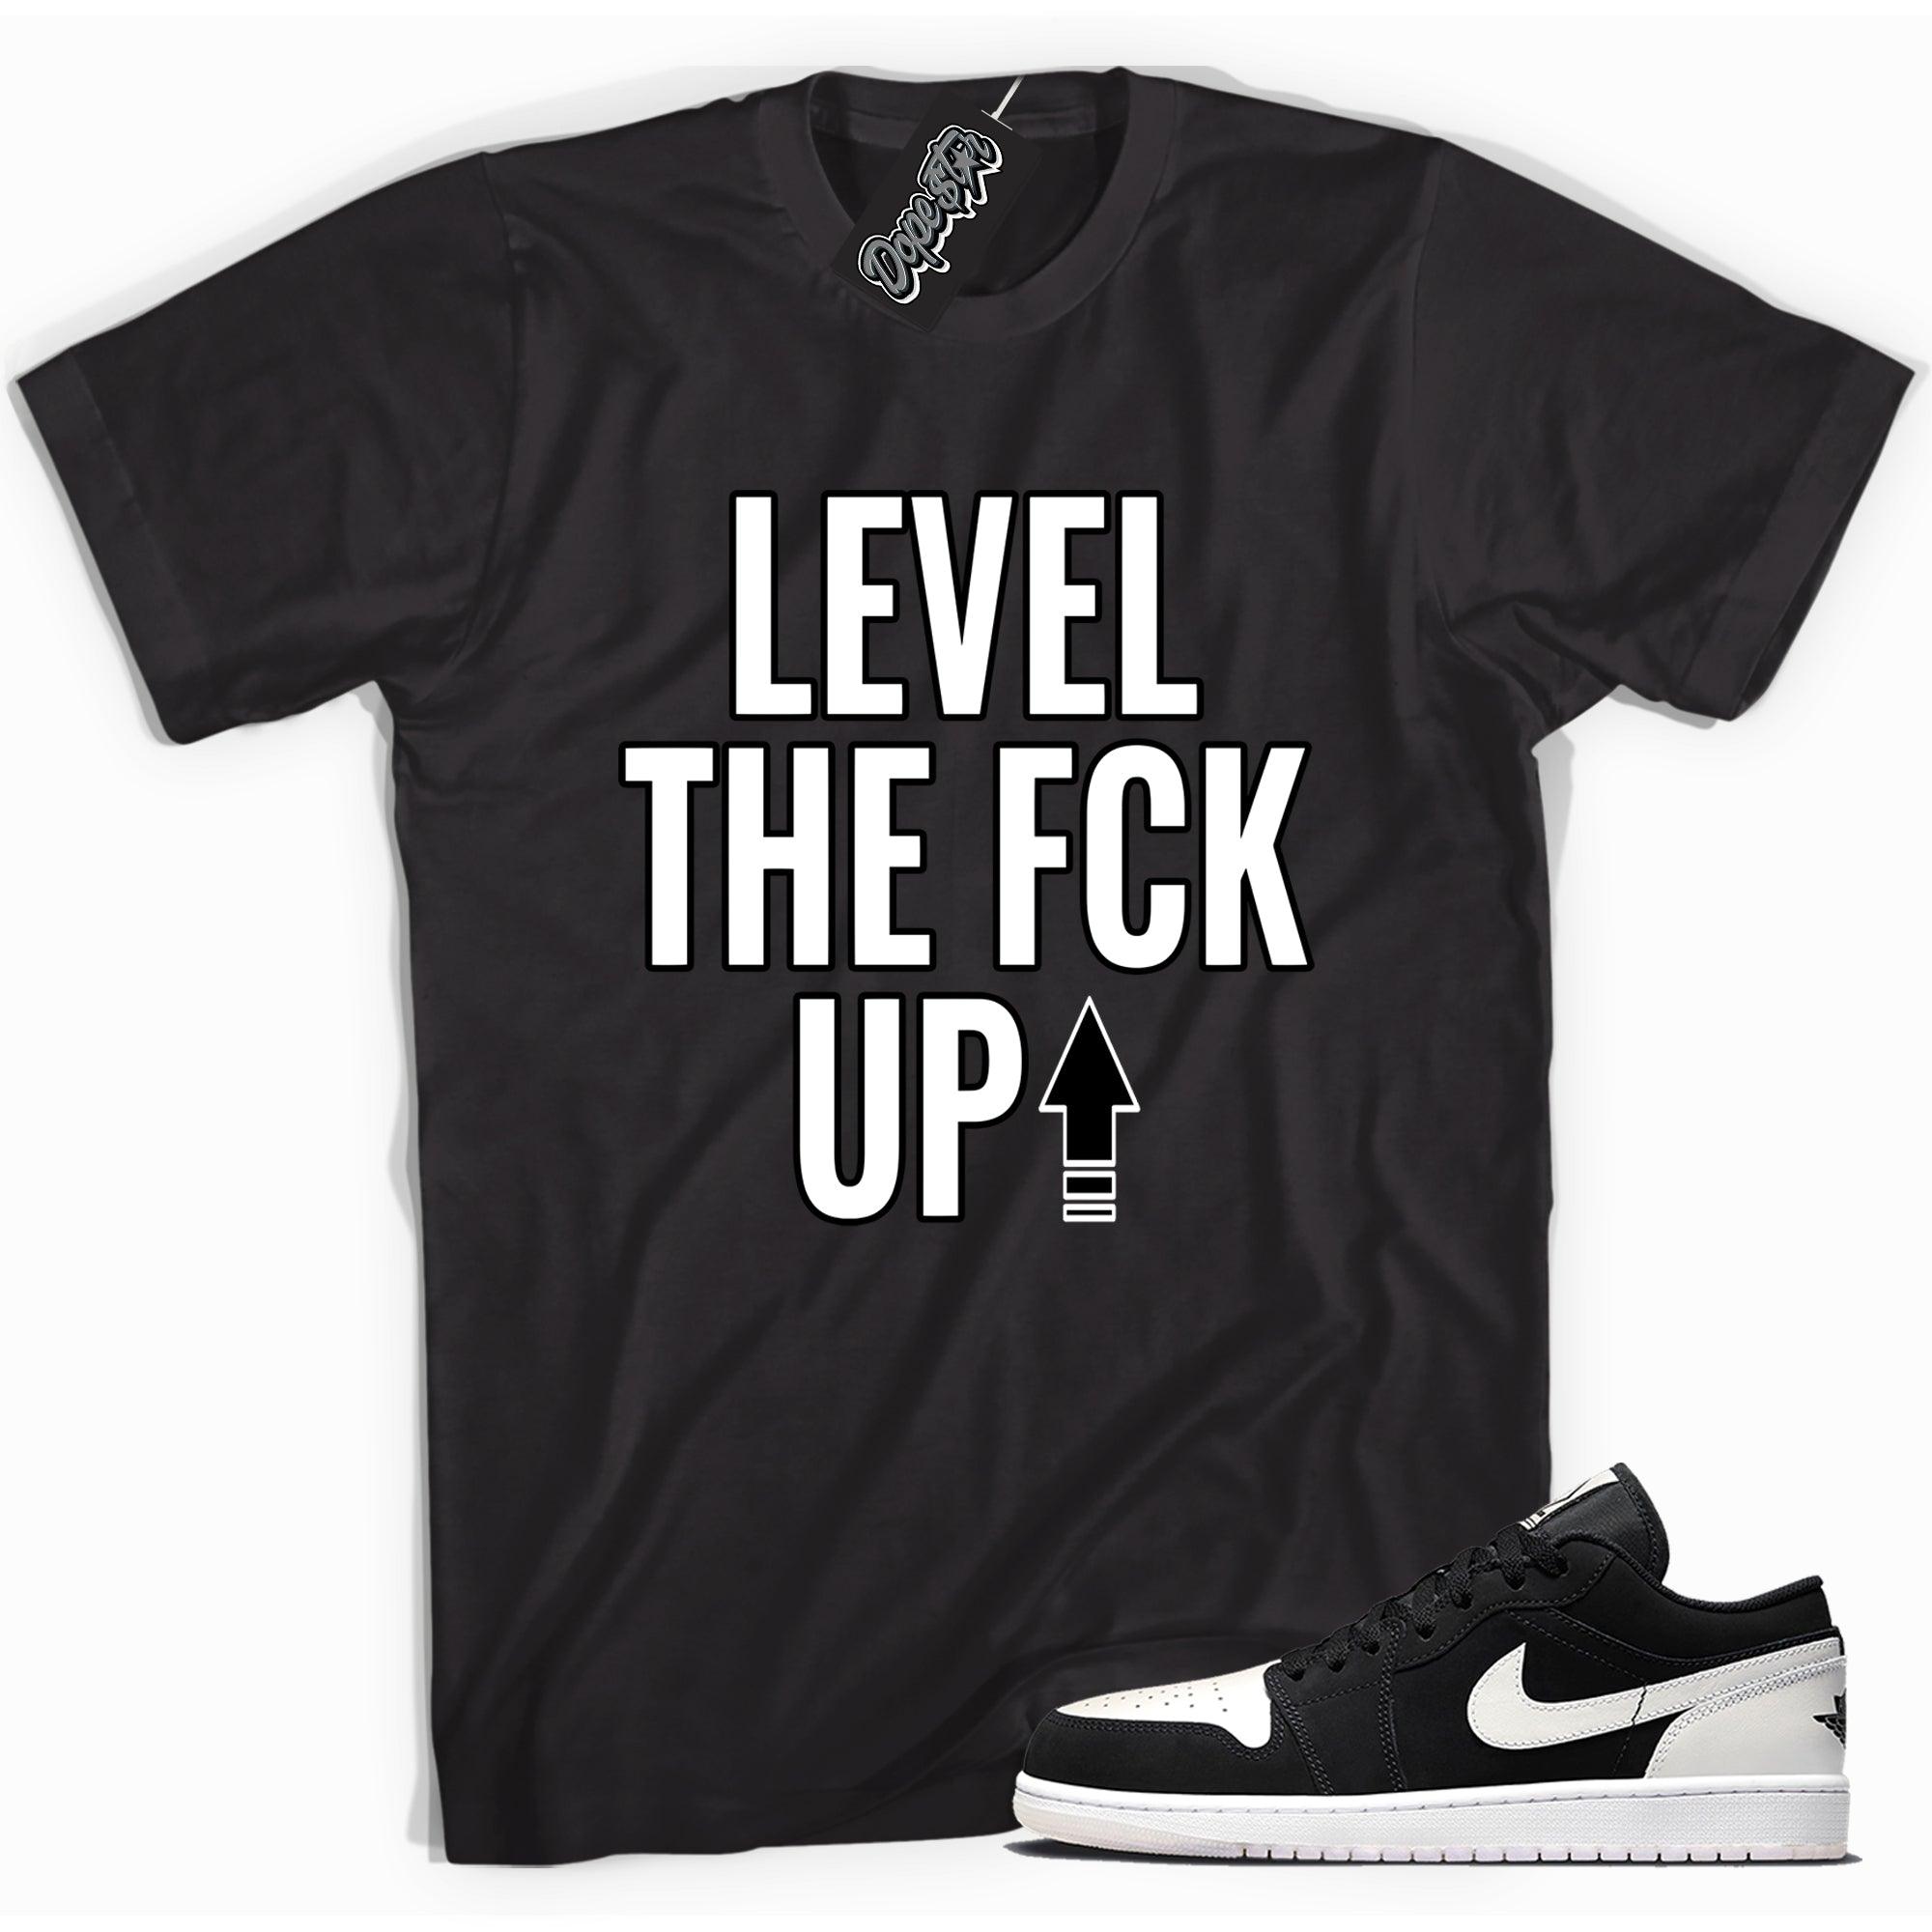 Cool black graphic tee with 'level up' print, that perfectly matches Air Jordan 1 Low Diamond sneakers.